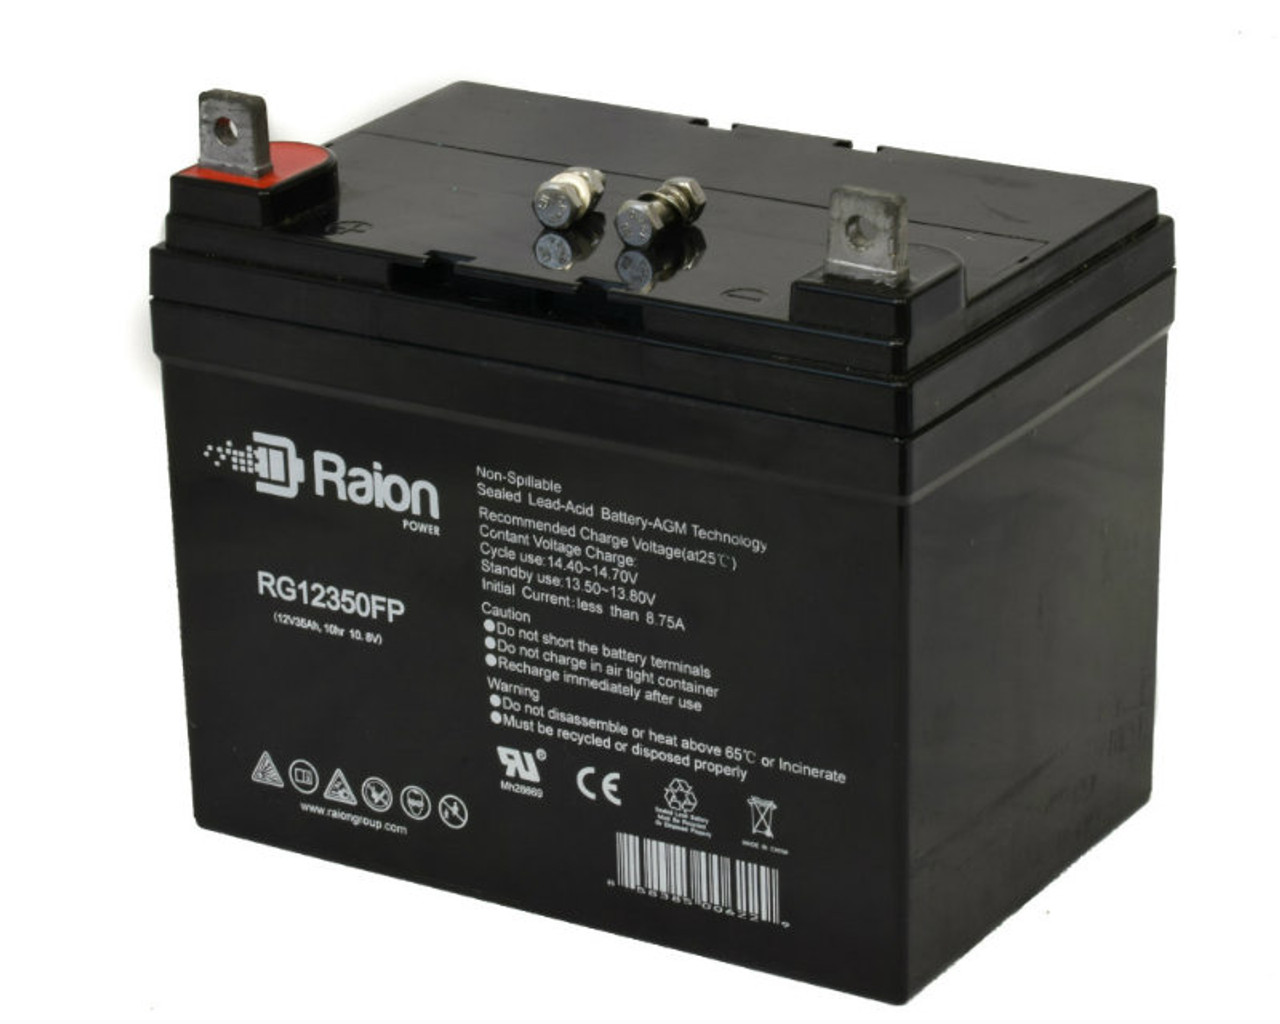 Raion Power Replacement 12V 35Ah RG12350FP Battery for Sabre (By John Deere) 1438GS